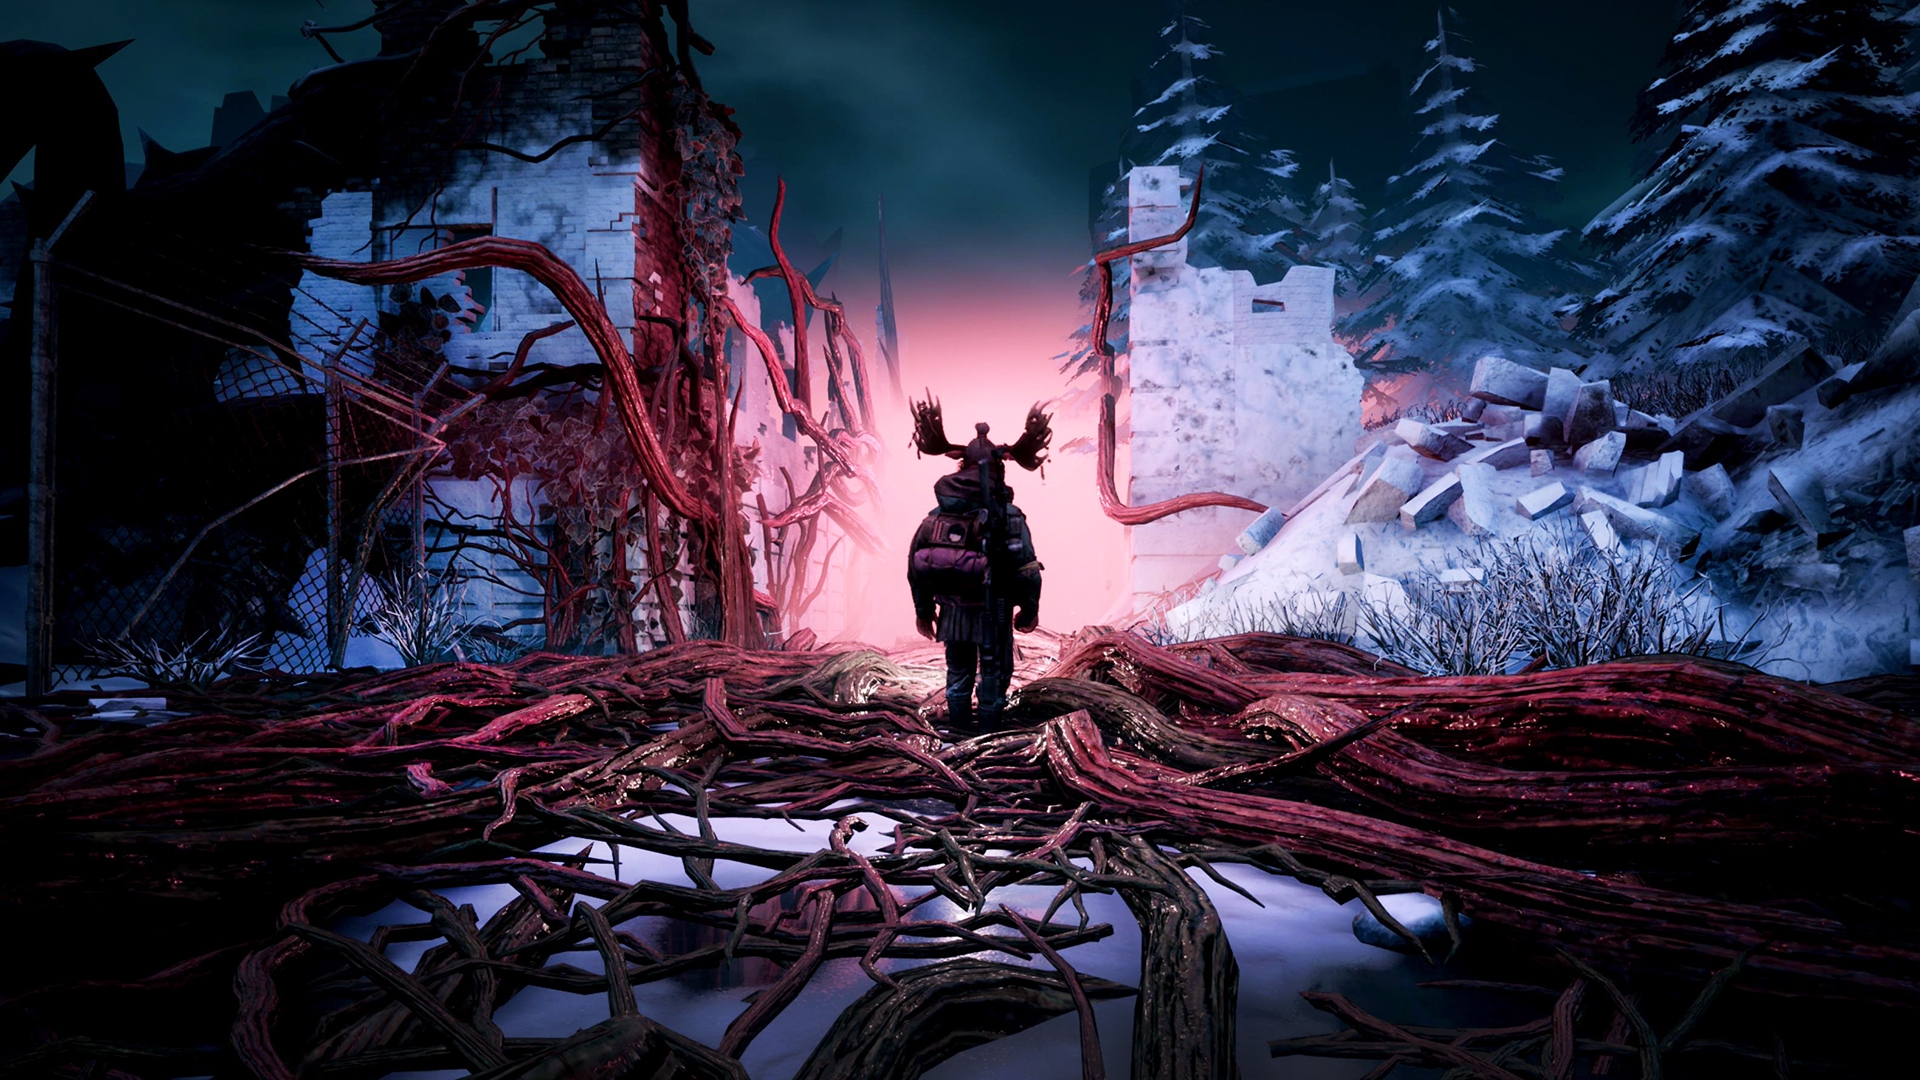 adventure, Funcom, Mutant Year Zero: Road to Eden, Mutant Year Zero: Road to Eden Review, Mutant Year Zero: Seed of Evil, Mutant Year Zero: Seed of Evil Review, Nintendo Switch Review, Rating 9/10, Role Playing Game, RPG, strategy, Switch Review, The Bearded Ladies, Turn-Based Combat